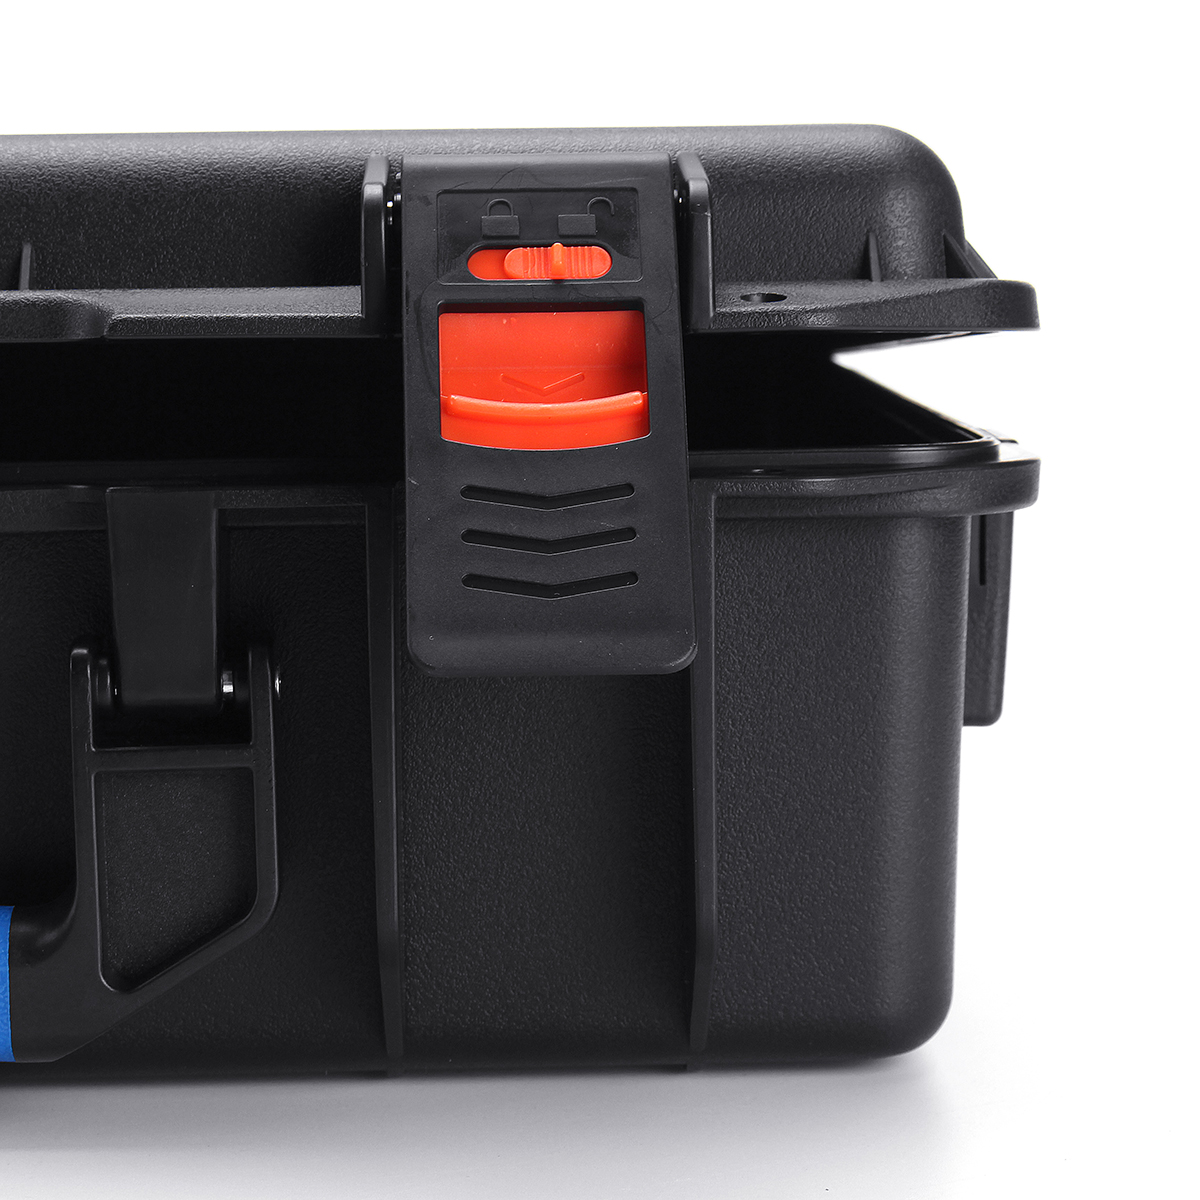 Waterproof-Hard-Carry-Case-Tool-Kits-Impact-Resistant-Shockproof-Storage-Box-Safety-Hardware-toolbox-1665199-8